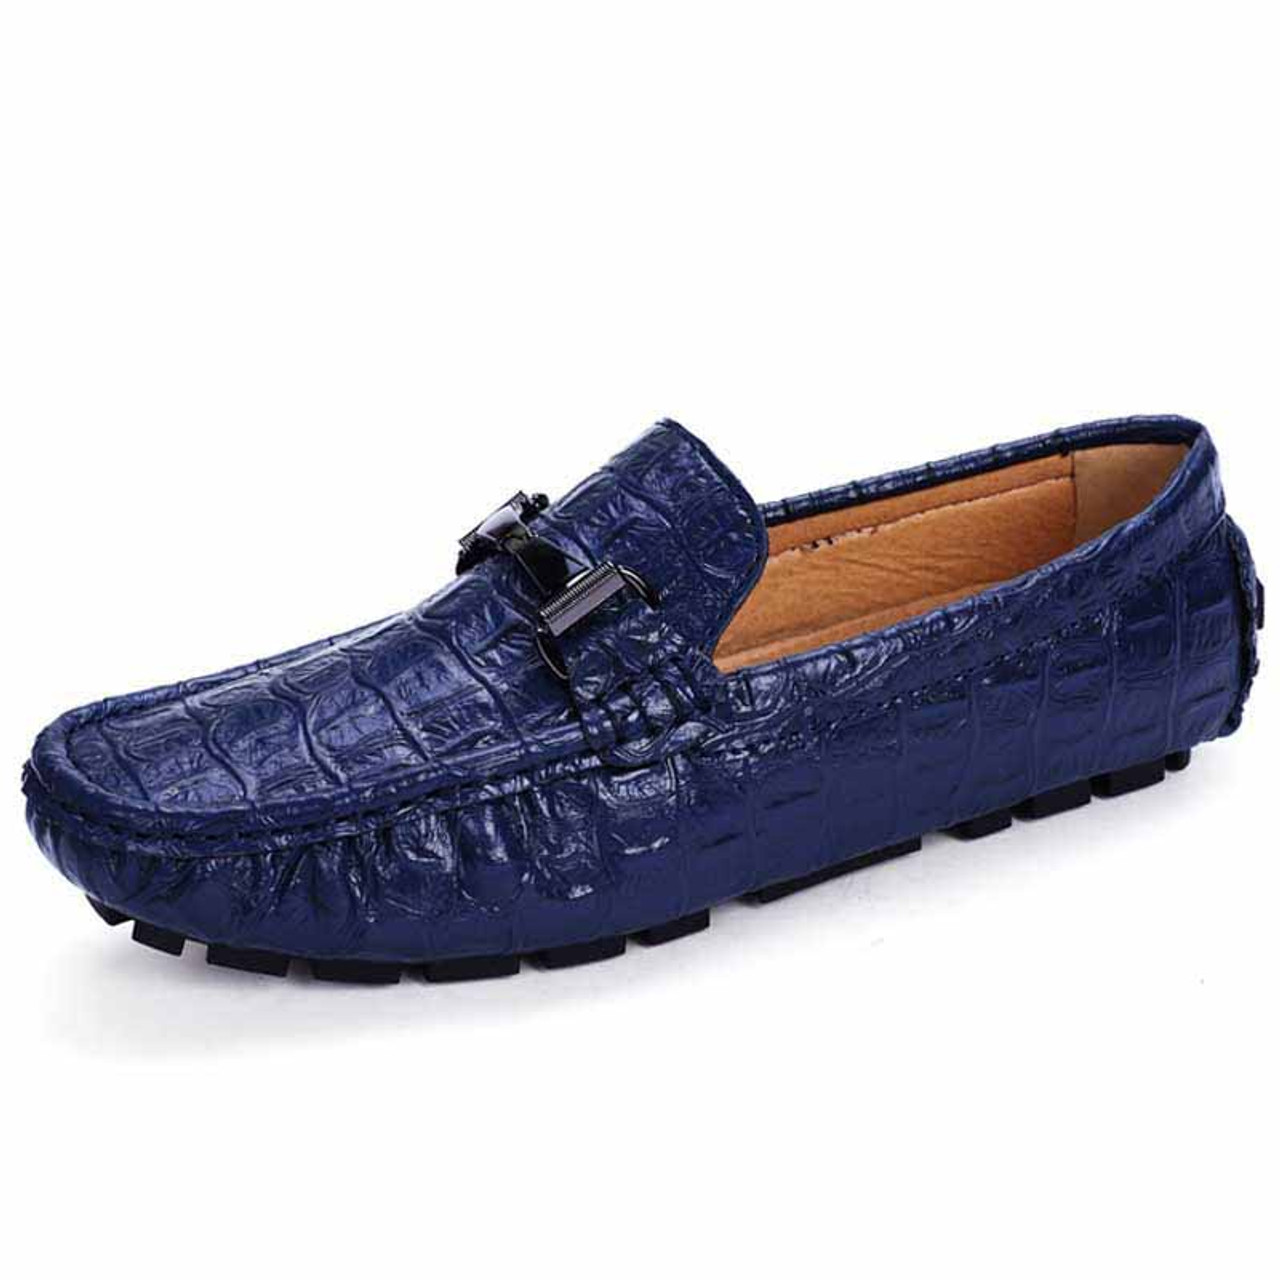 Maglieriapelle Men's Designer Shoes Navy Blue Siran Crocodile Print and Calf-Skin Leather Loafers (MG1166)